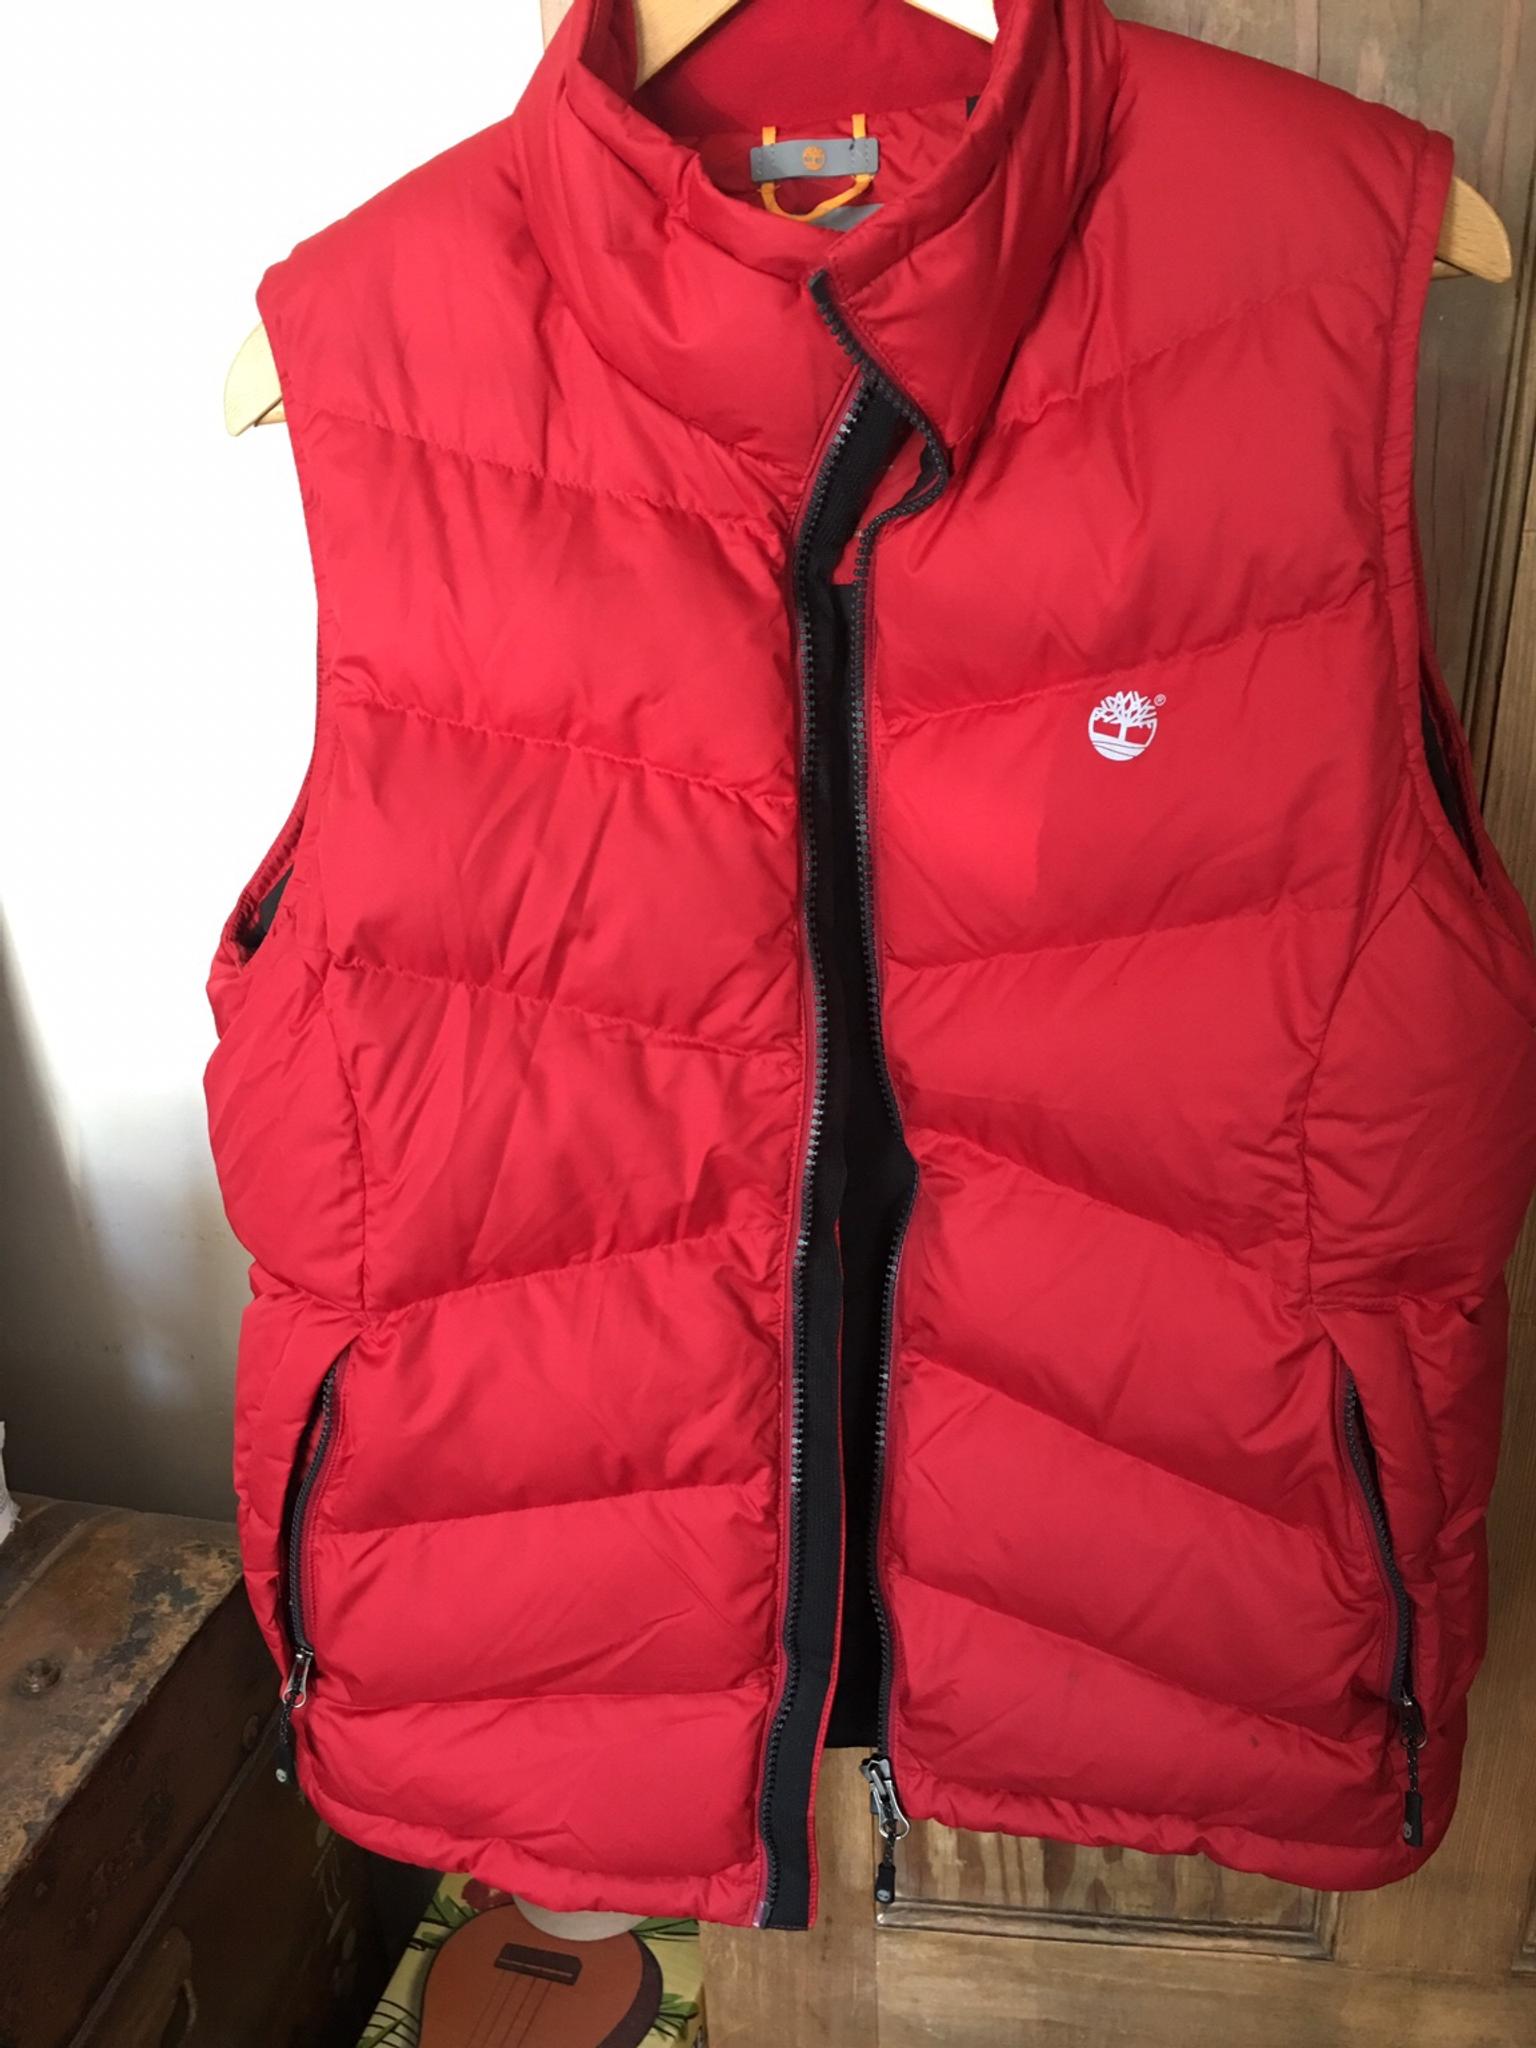 Men's Timberland red gilet size Xl in 